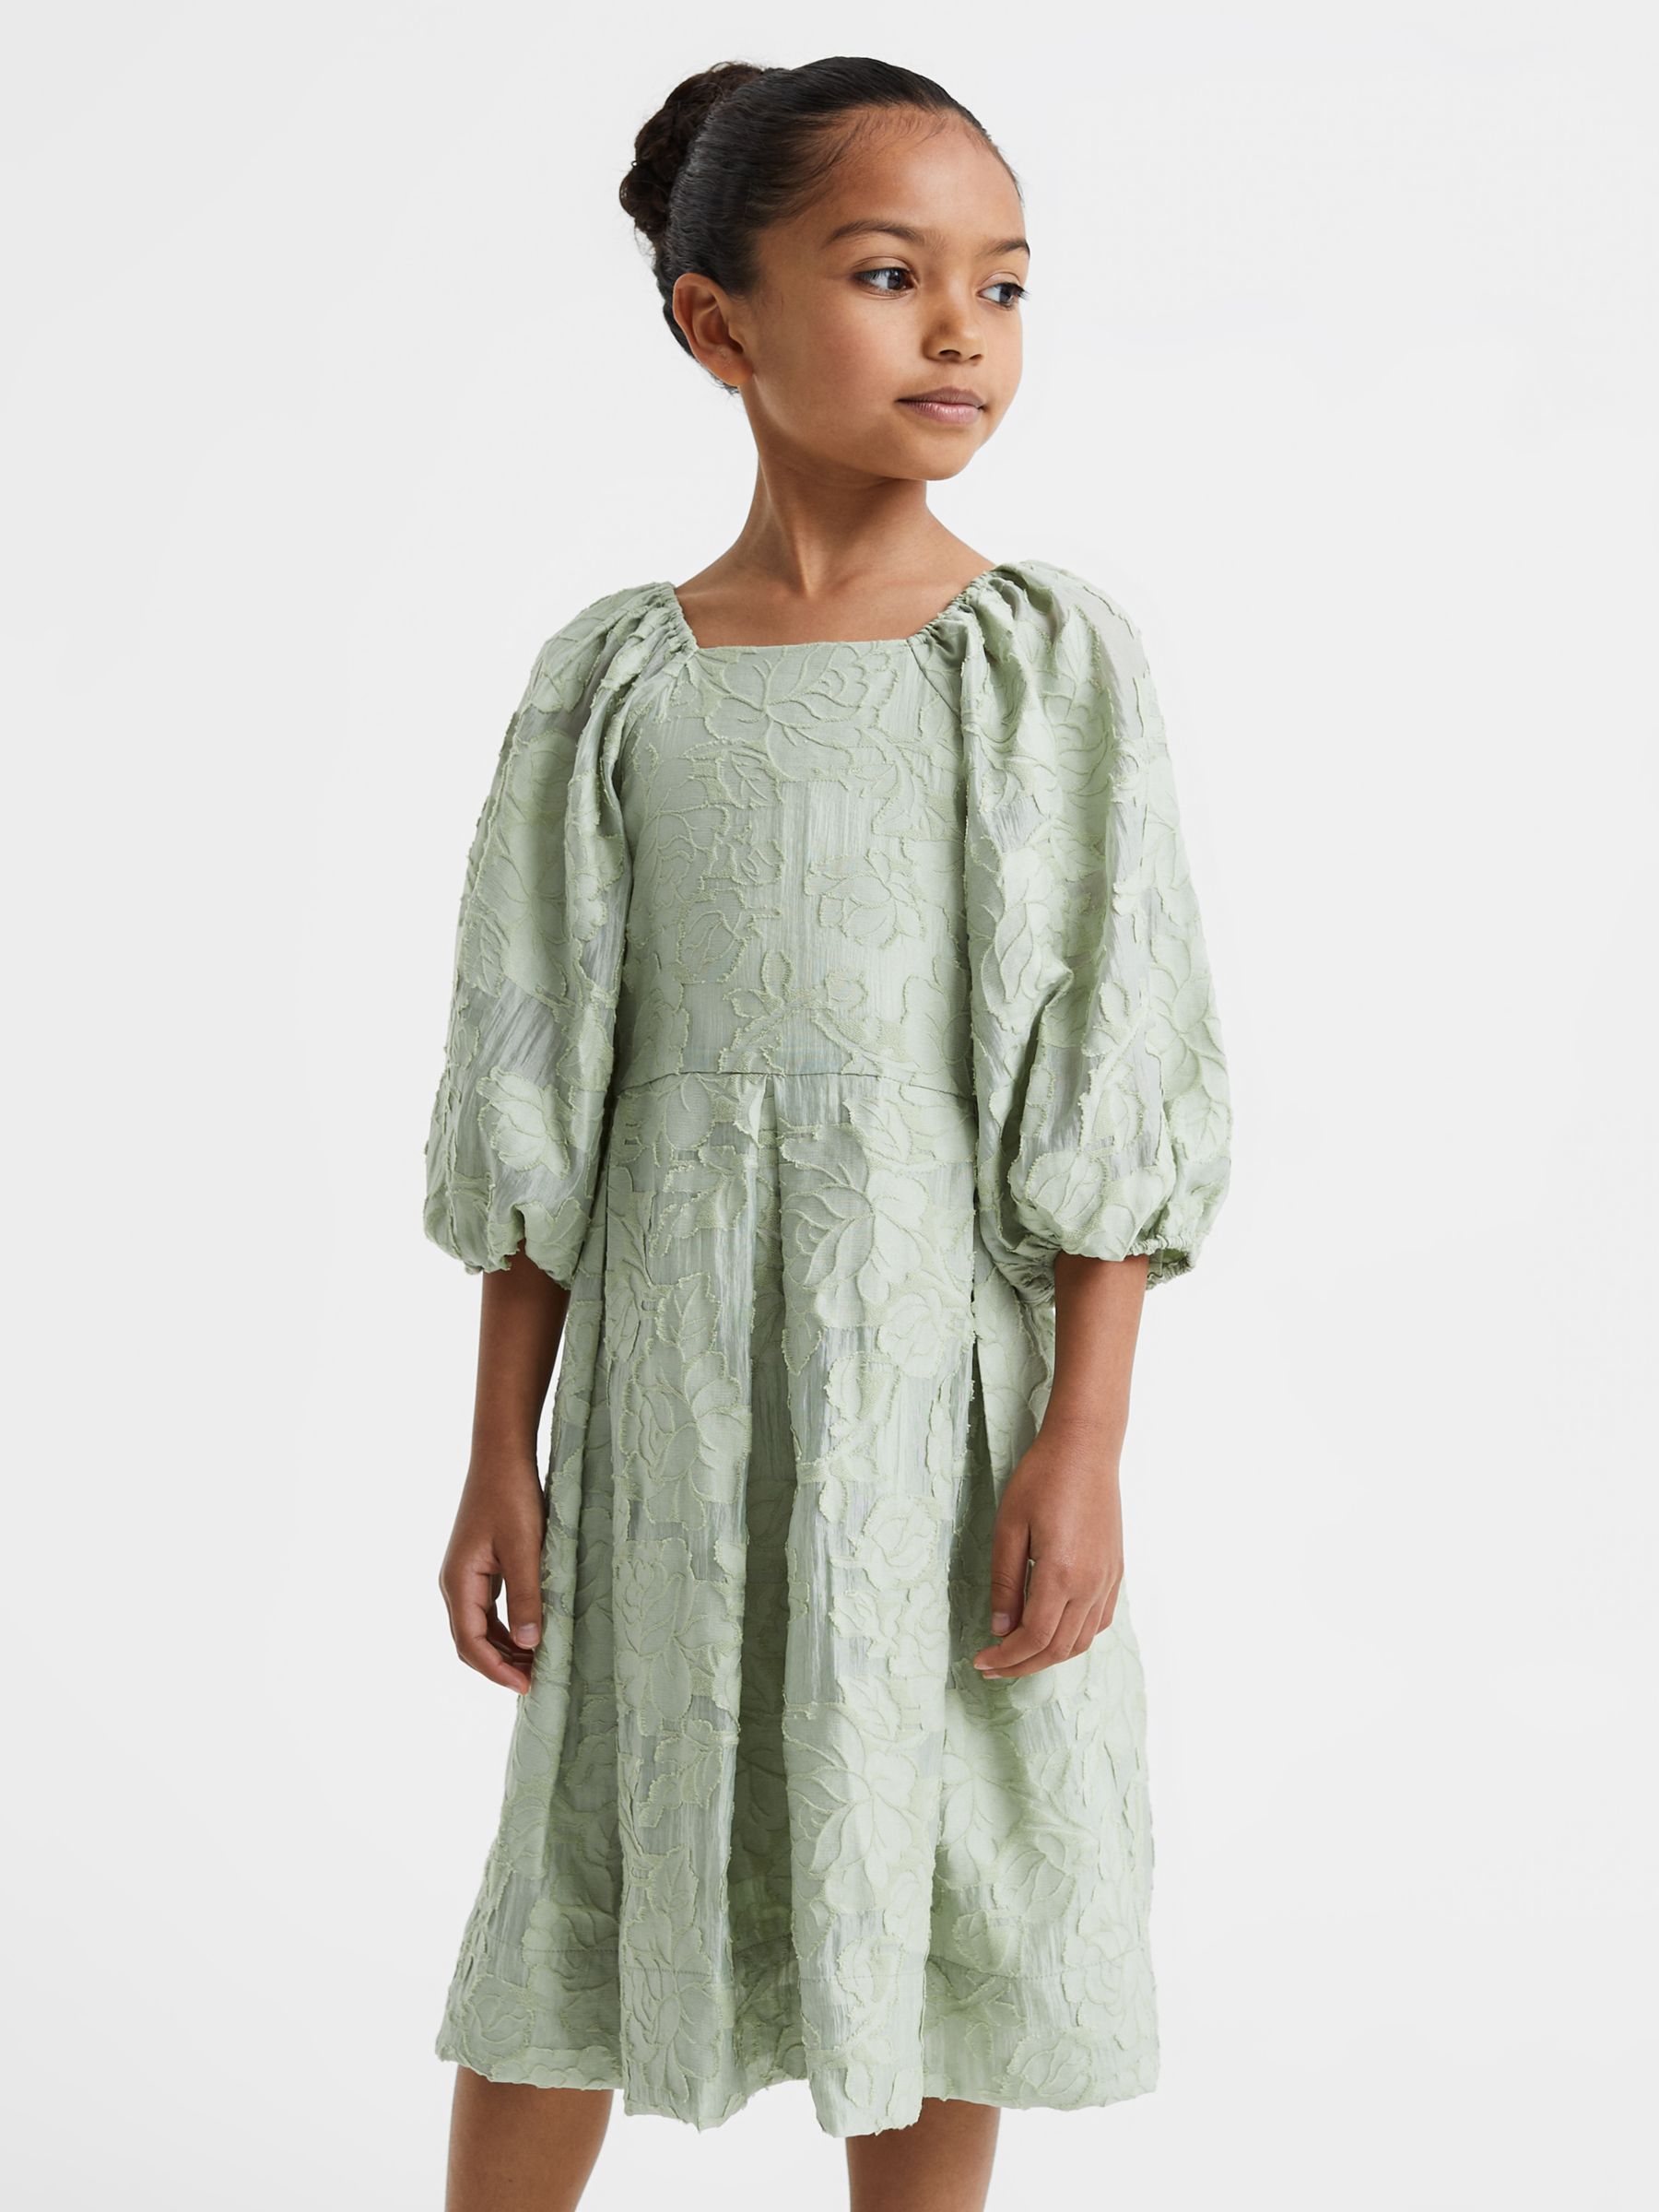 Reiss Kids' Thea Floral Jacquard Puff Sleeve Dress, Sage, 8-9 years